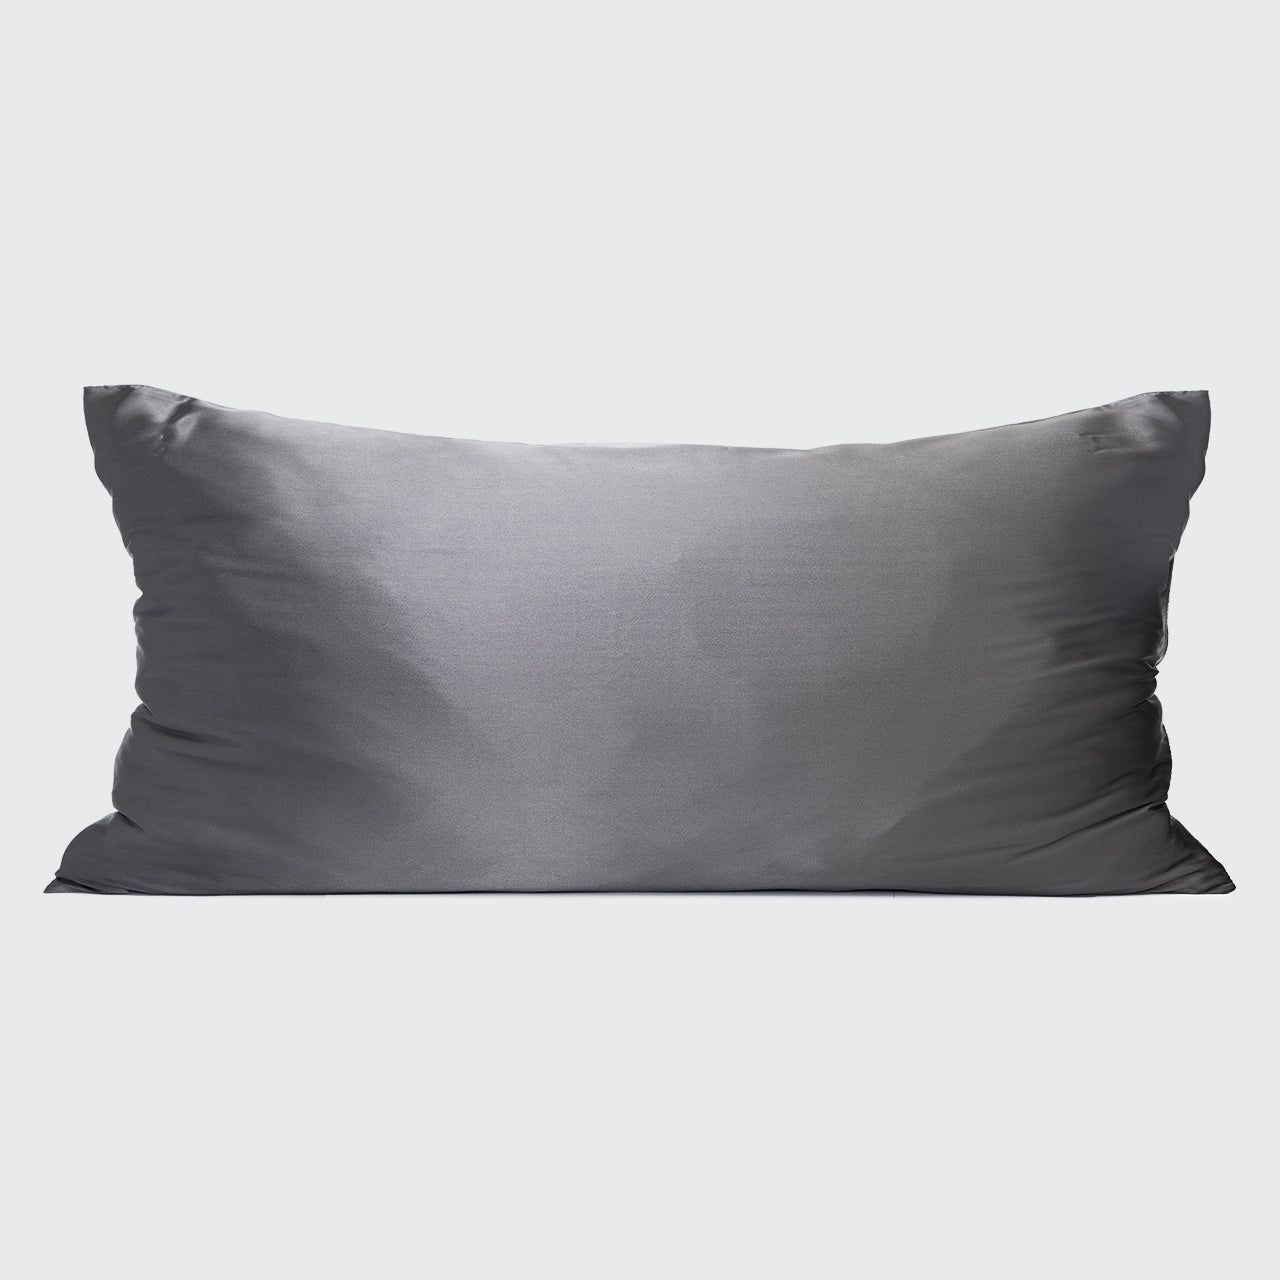 King Satin Pillowcase - Charcoal by KITSCH - Lotus and Willow